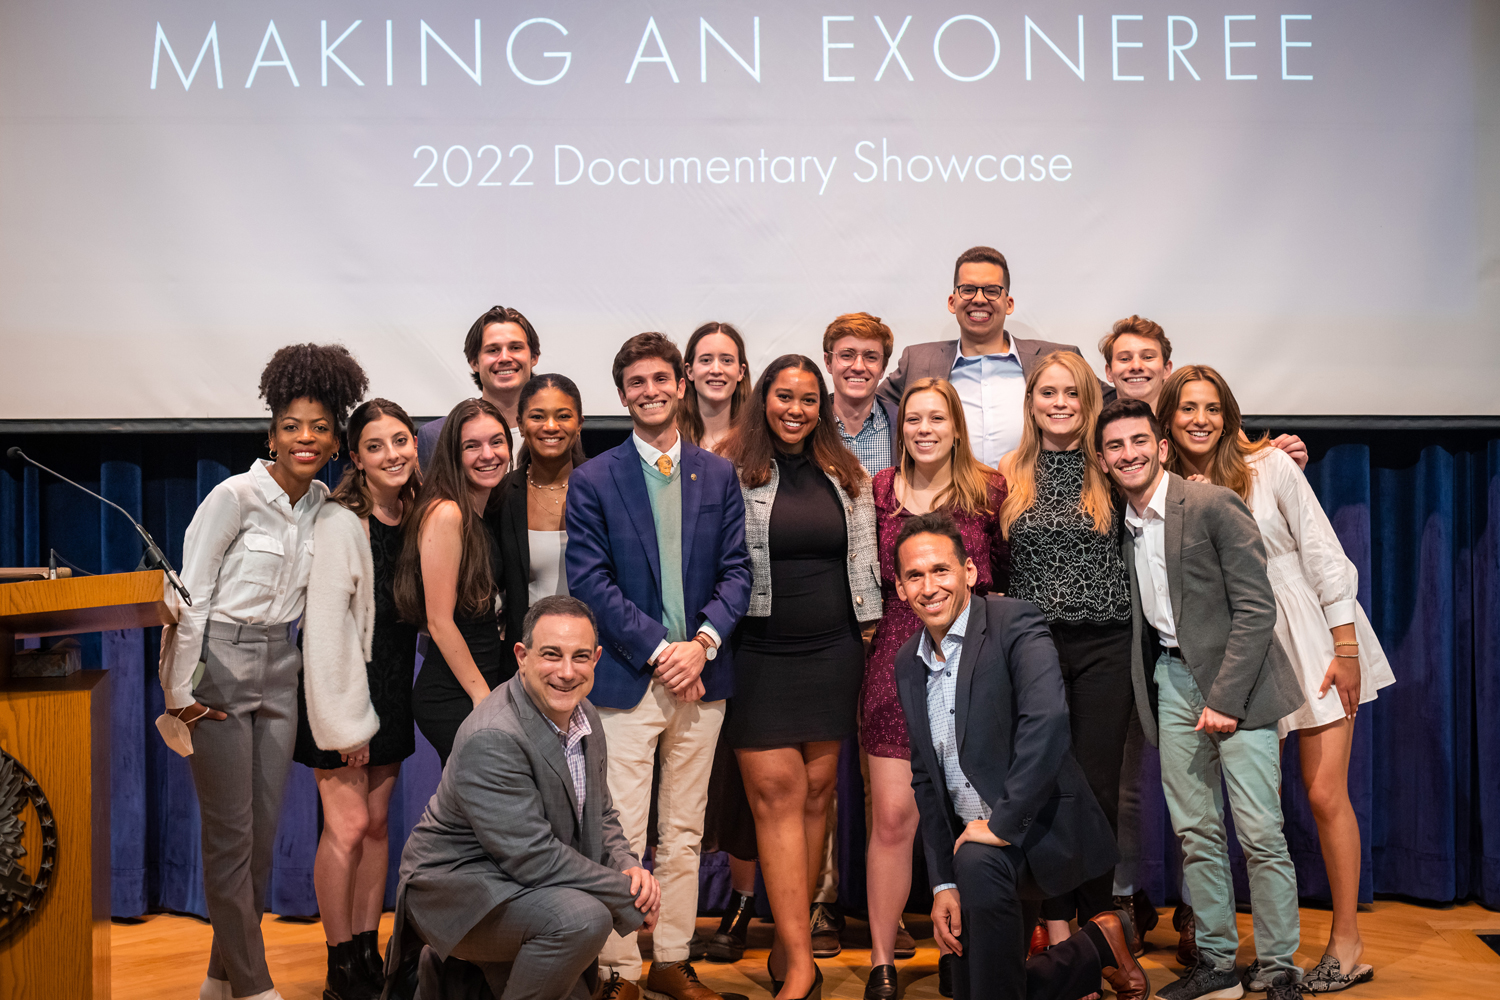 A group of students pose together for the debut of documentaries from their Making of an Exoneree class at Georgetown.